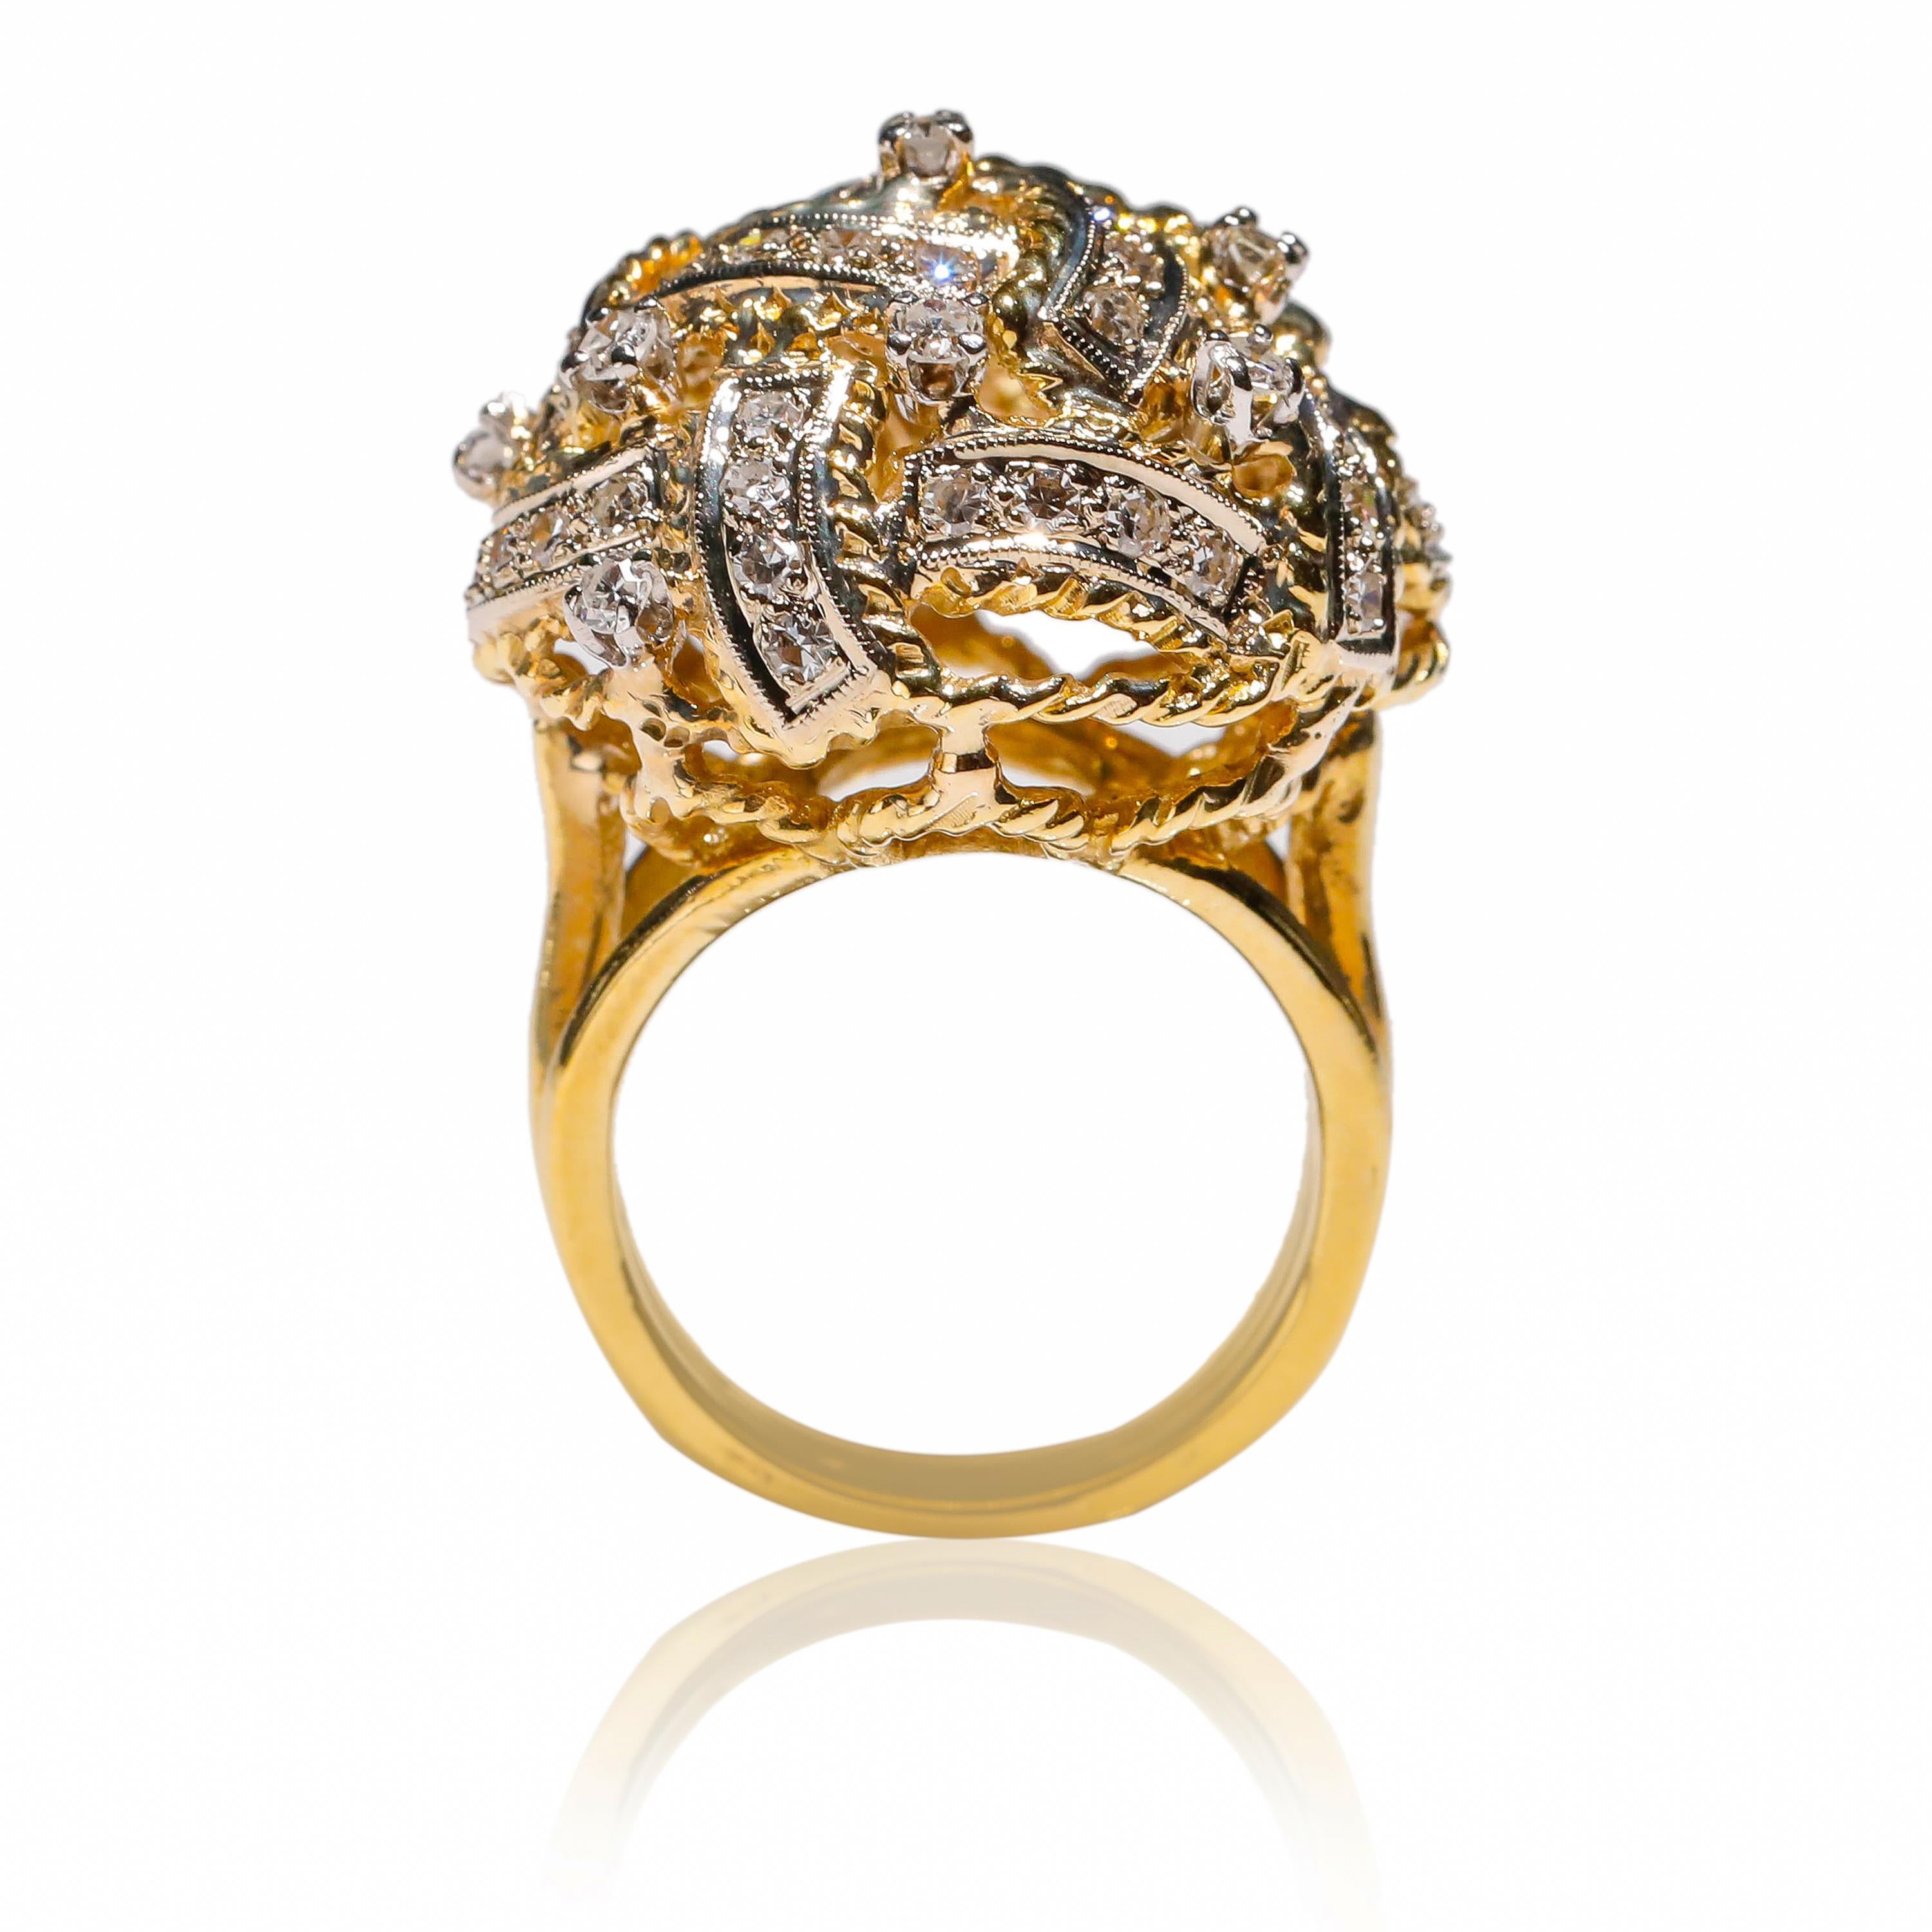 18 Karat Yellow Gold 1.5 Carat Round Pave Diamond Cocktail Ring Vintage Style

Crafted in 18 kt Yellow Gold, this Unique design showcases a white Diamond 1.5 TCW Round Cut diamond, set in a solid Yellow Gold, Polished to a brilliant shine.

Gold